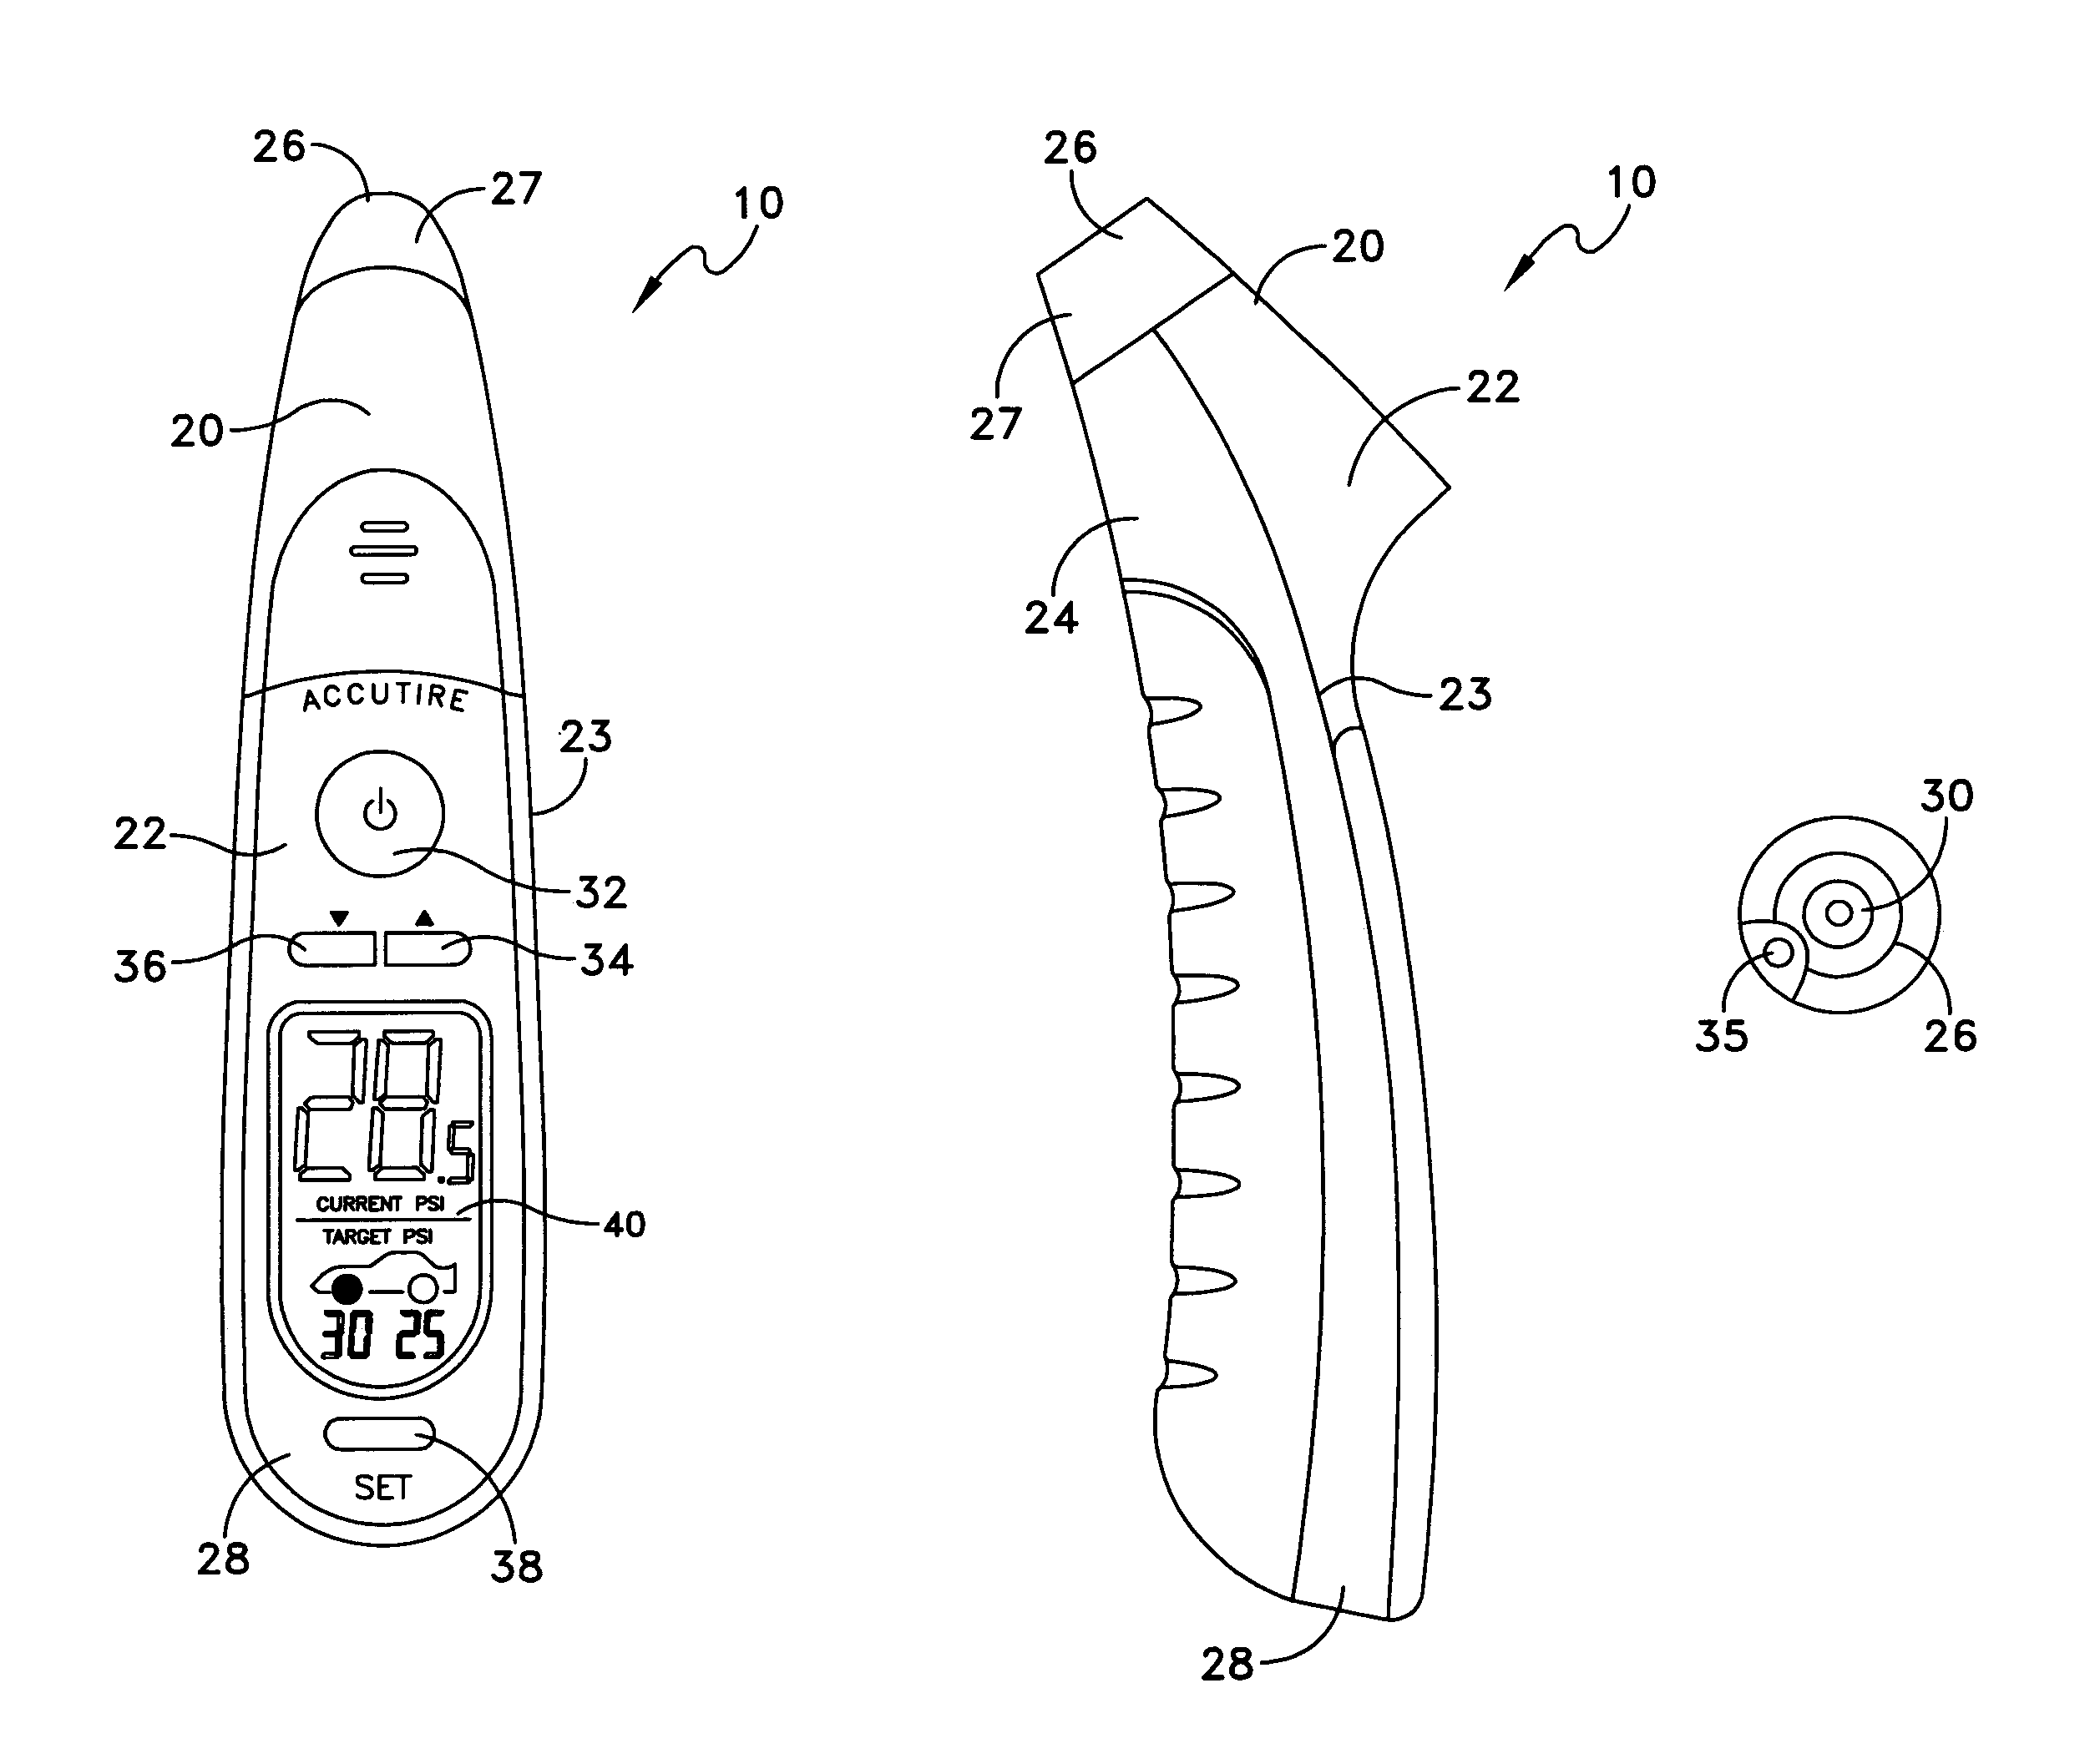 Hand-held tire pressure gauge and method for assisting a user to determine whether a tire pressure is within a target range using a hand-held tire pressure gauge